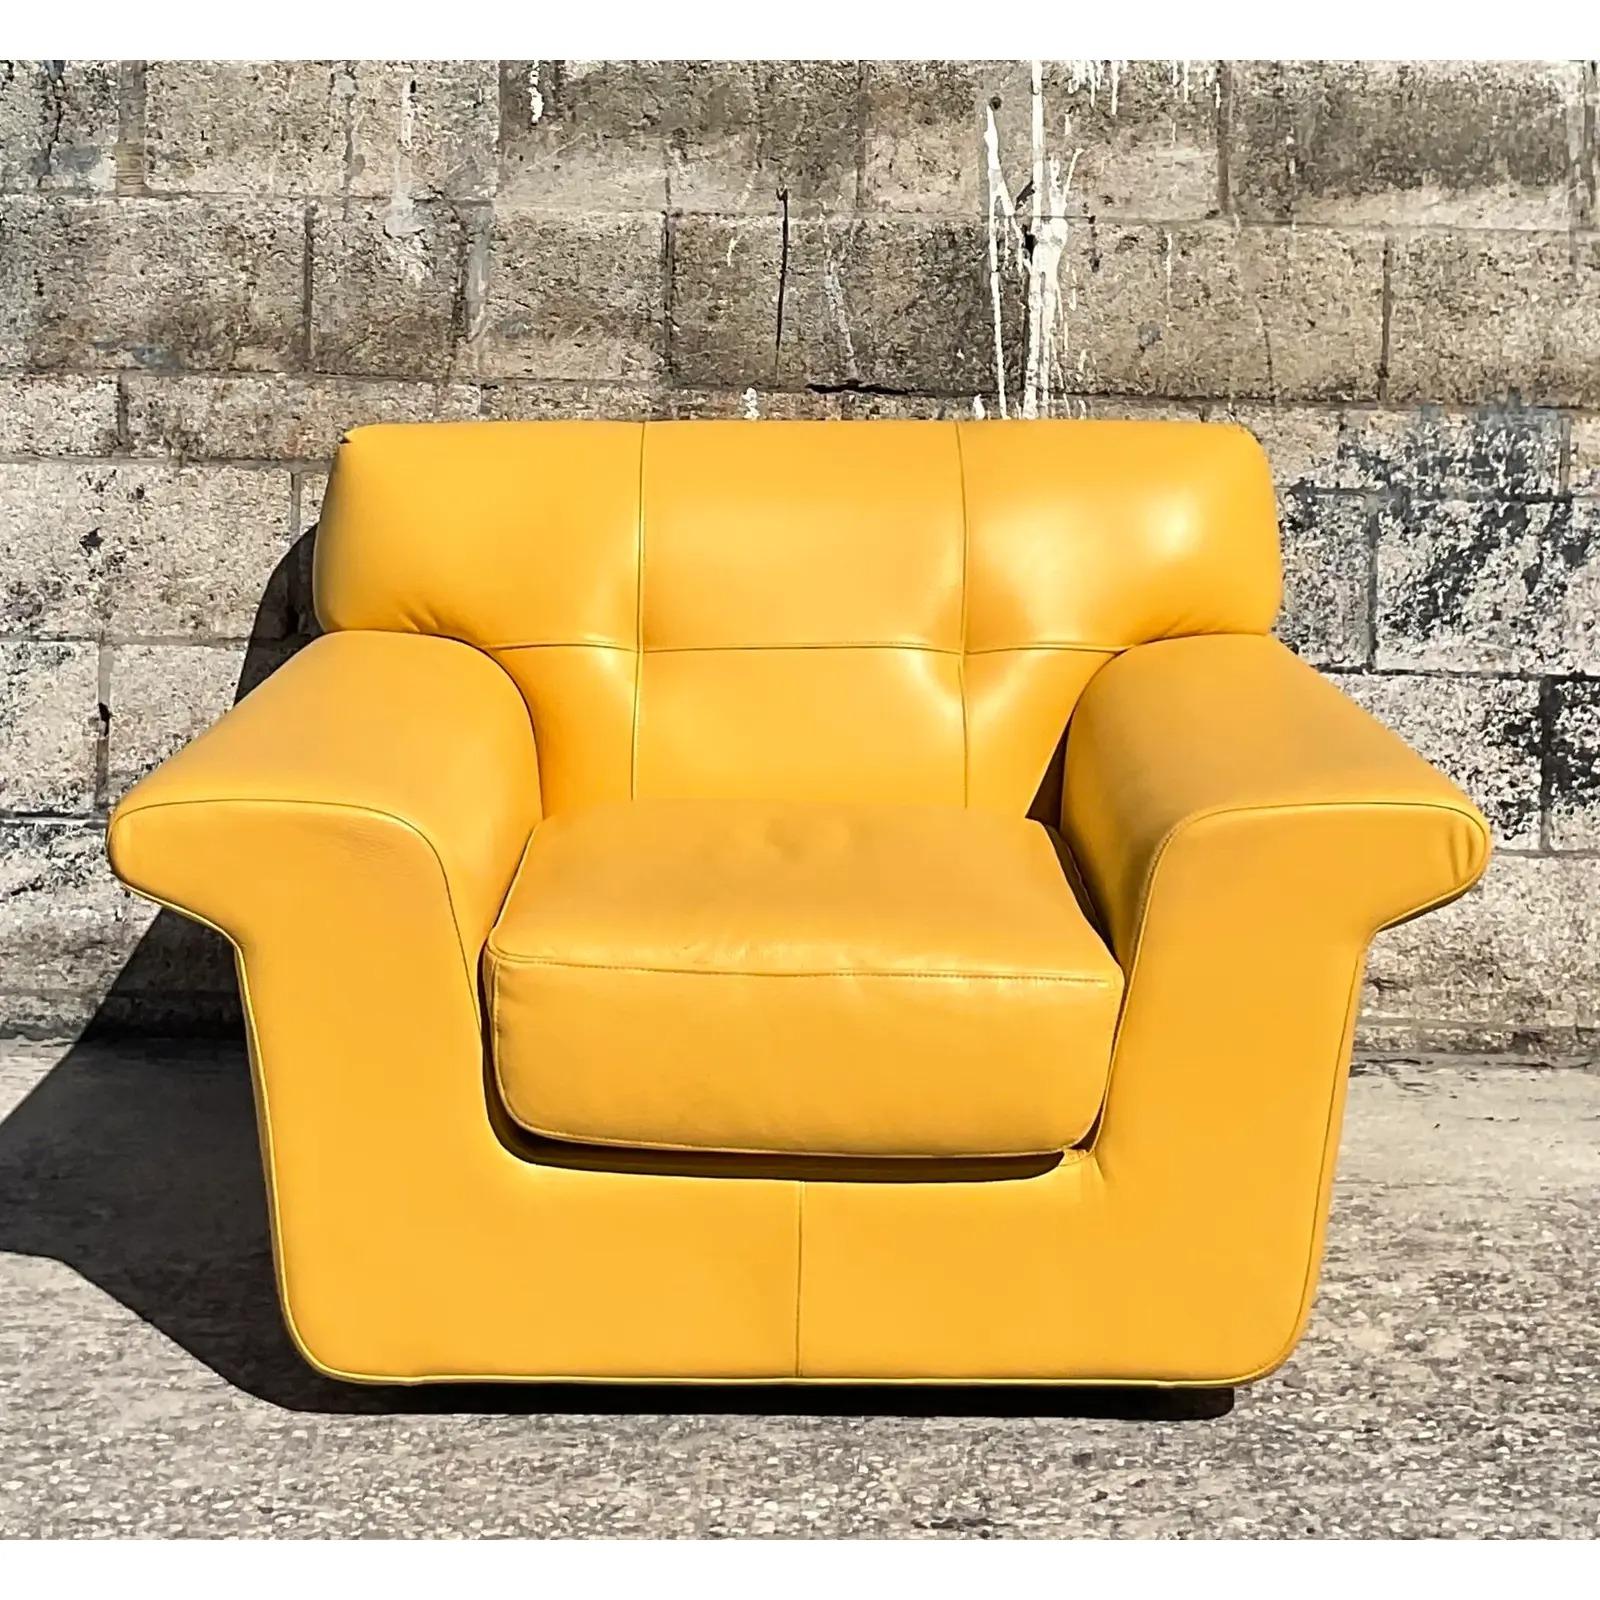 yellow leather chairs